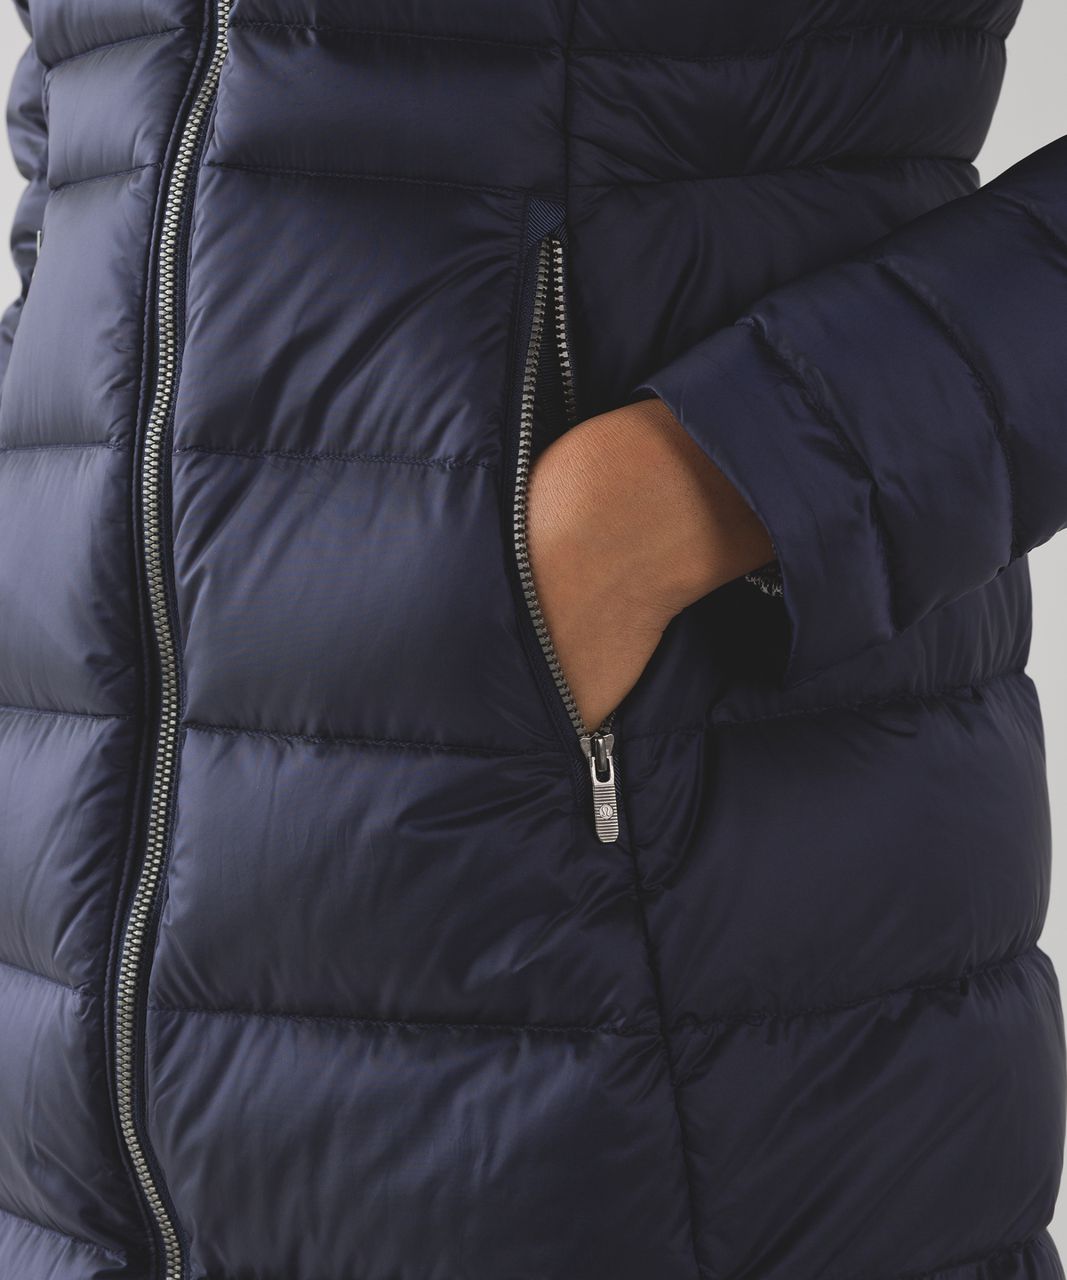 Ready to brave the cold with Ready to Rulu and Wunder Puff jacket